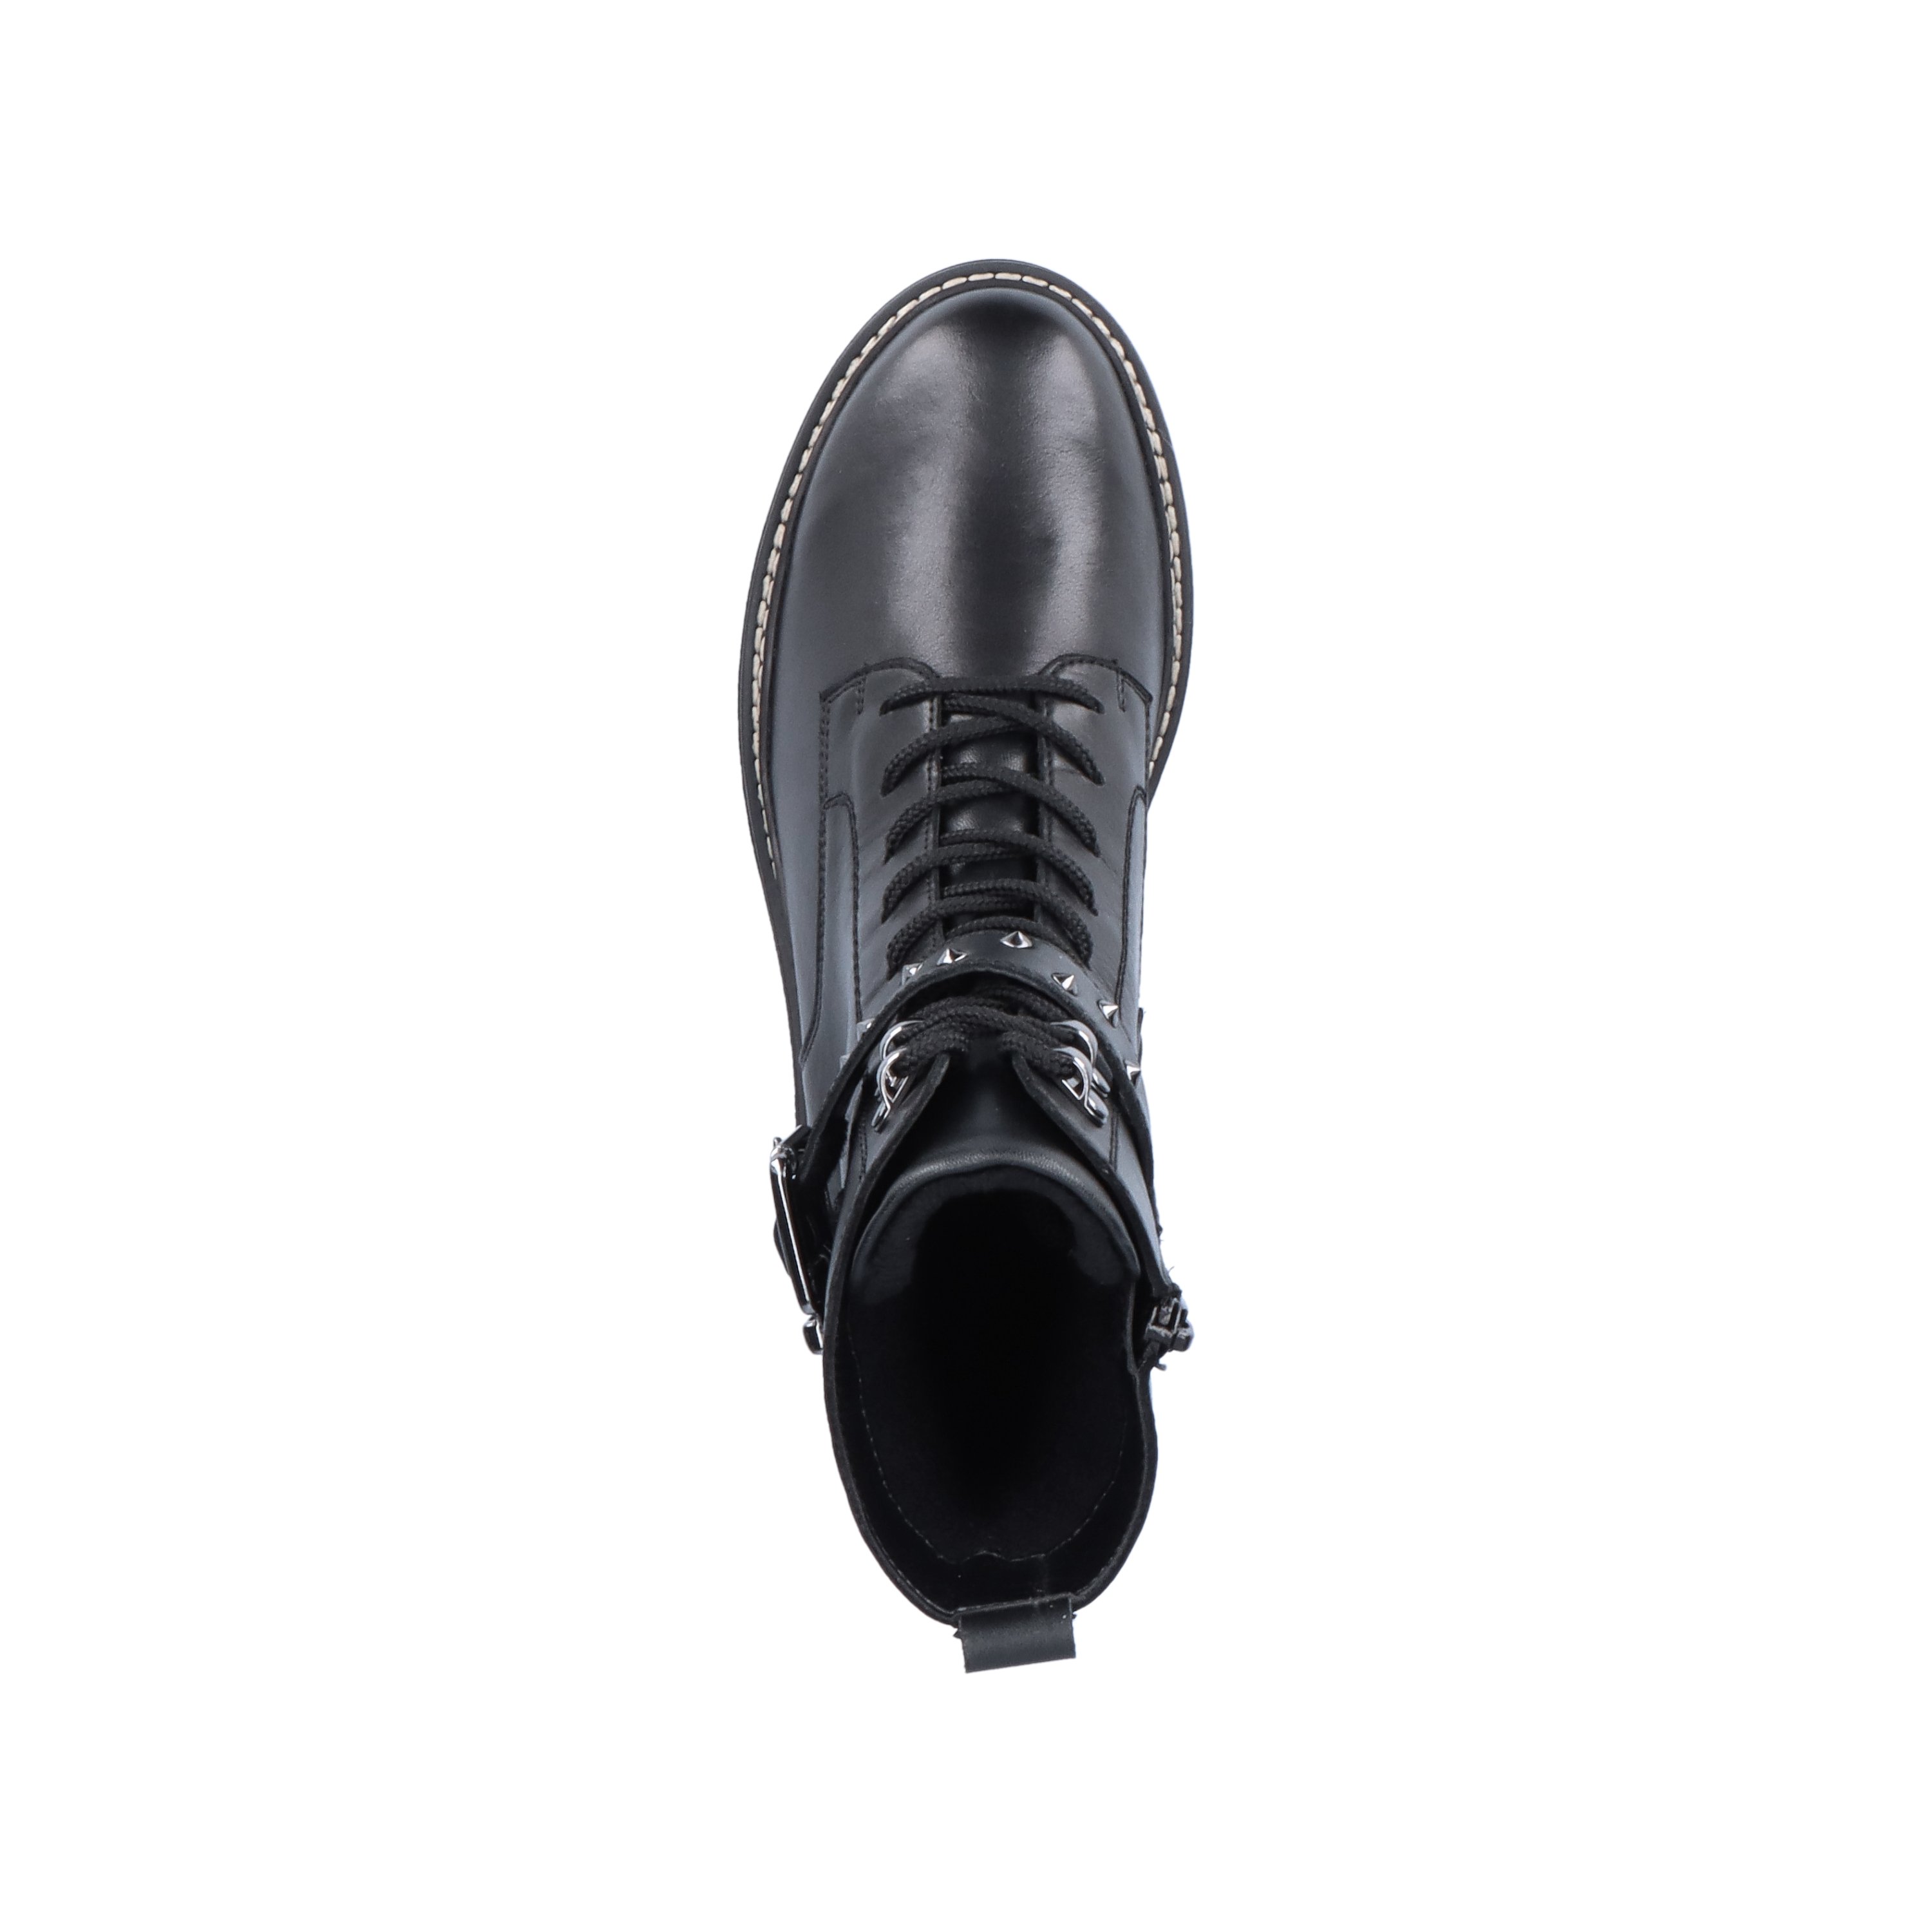 Jet black remonte women´s biker boots D0B73-01 with cushioning profile sole. Shoe from the top